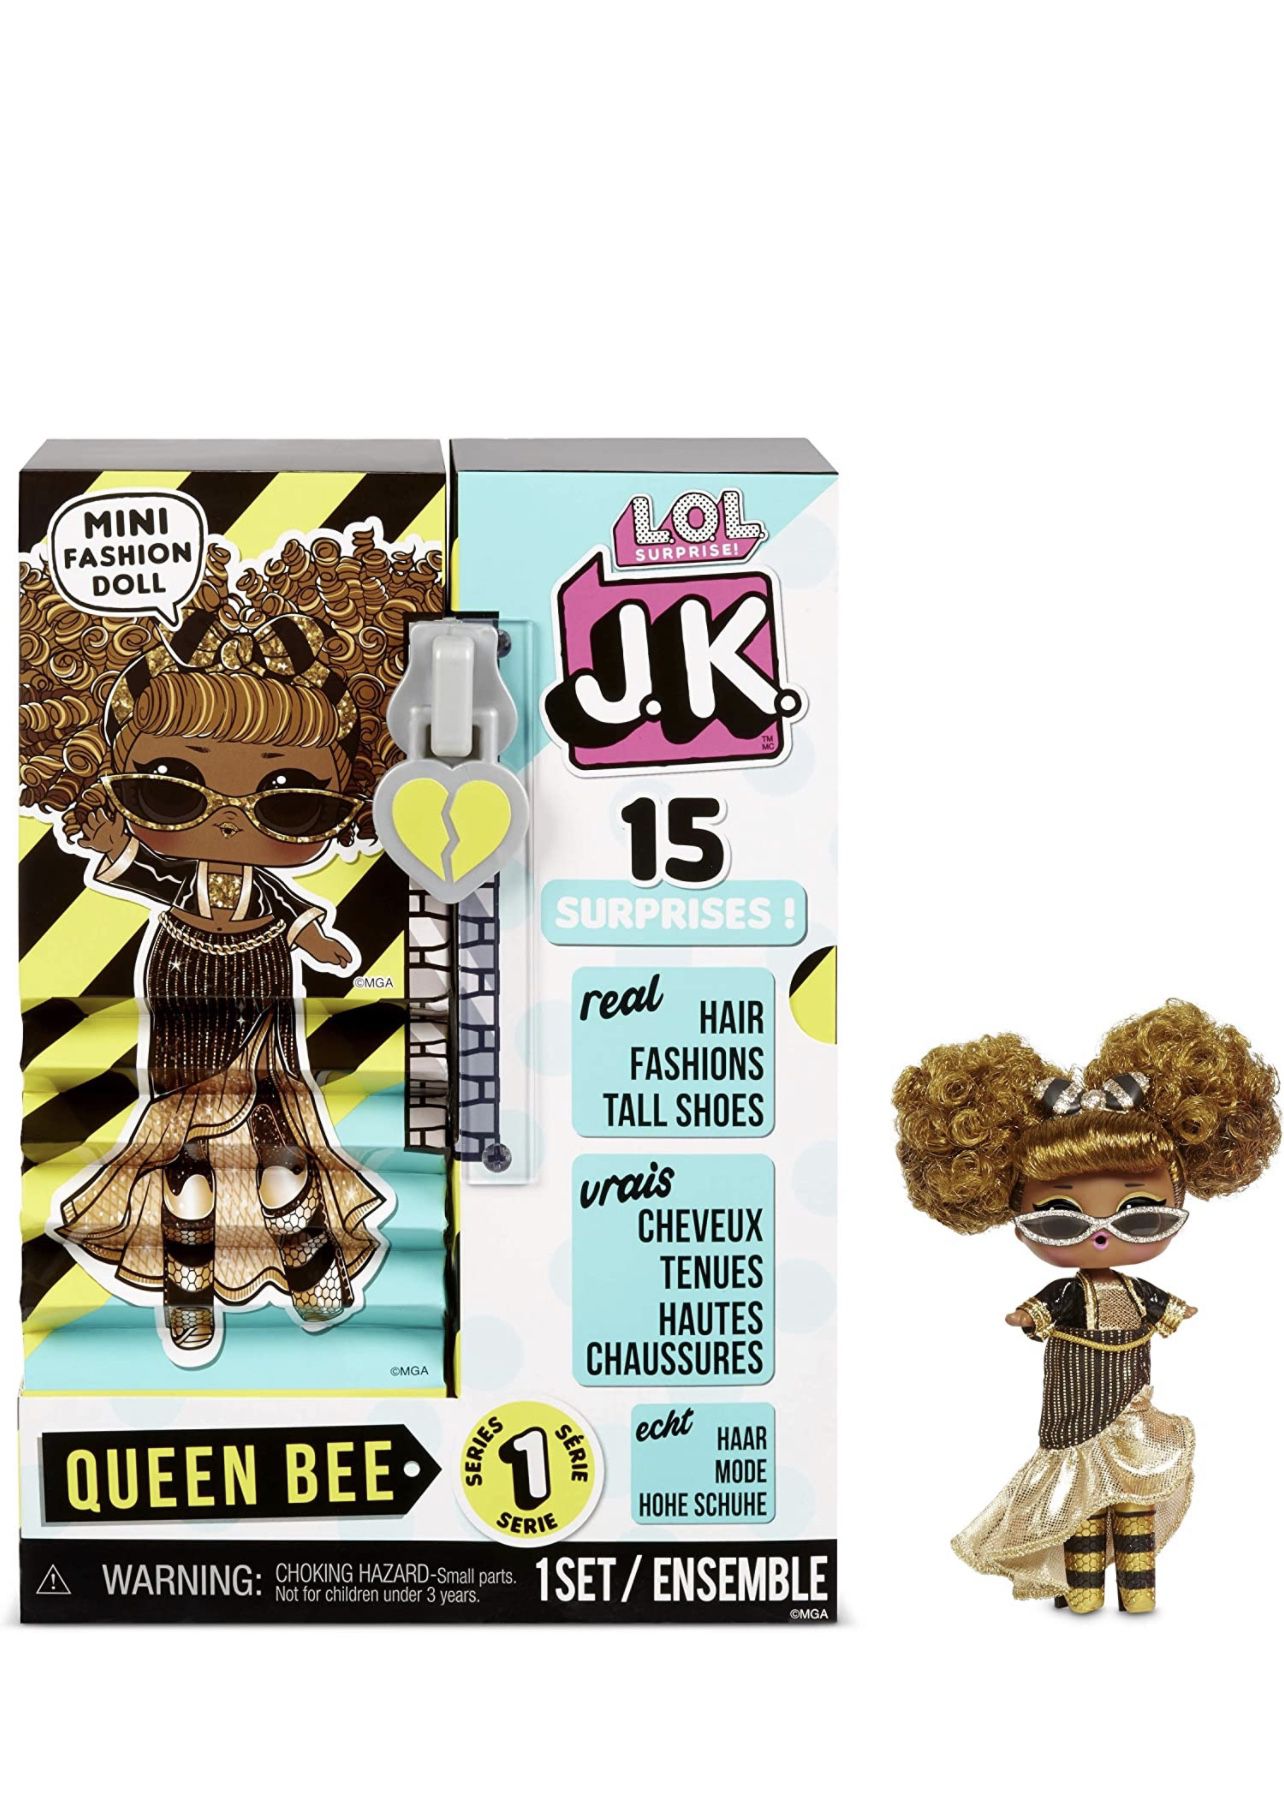 LOL Surprise JK Mini Fashion Doll Queen Bee with 15 Surprises Including Dress Up Doll Outfits, Exclusive Doll Accessories - Girls Gifts Toys and Mix M